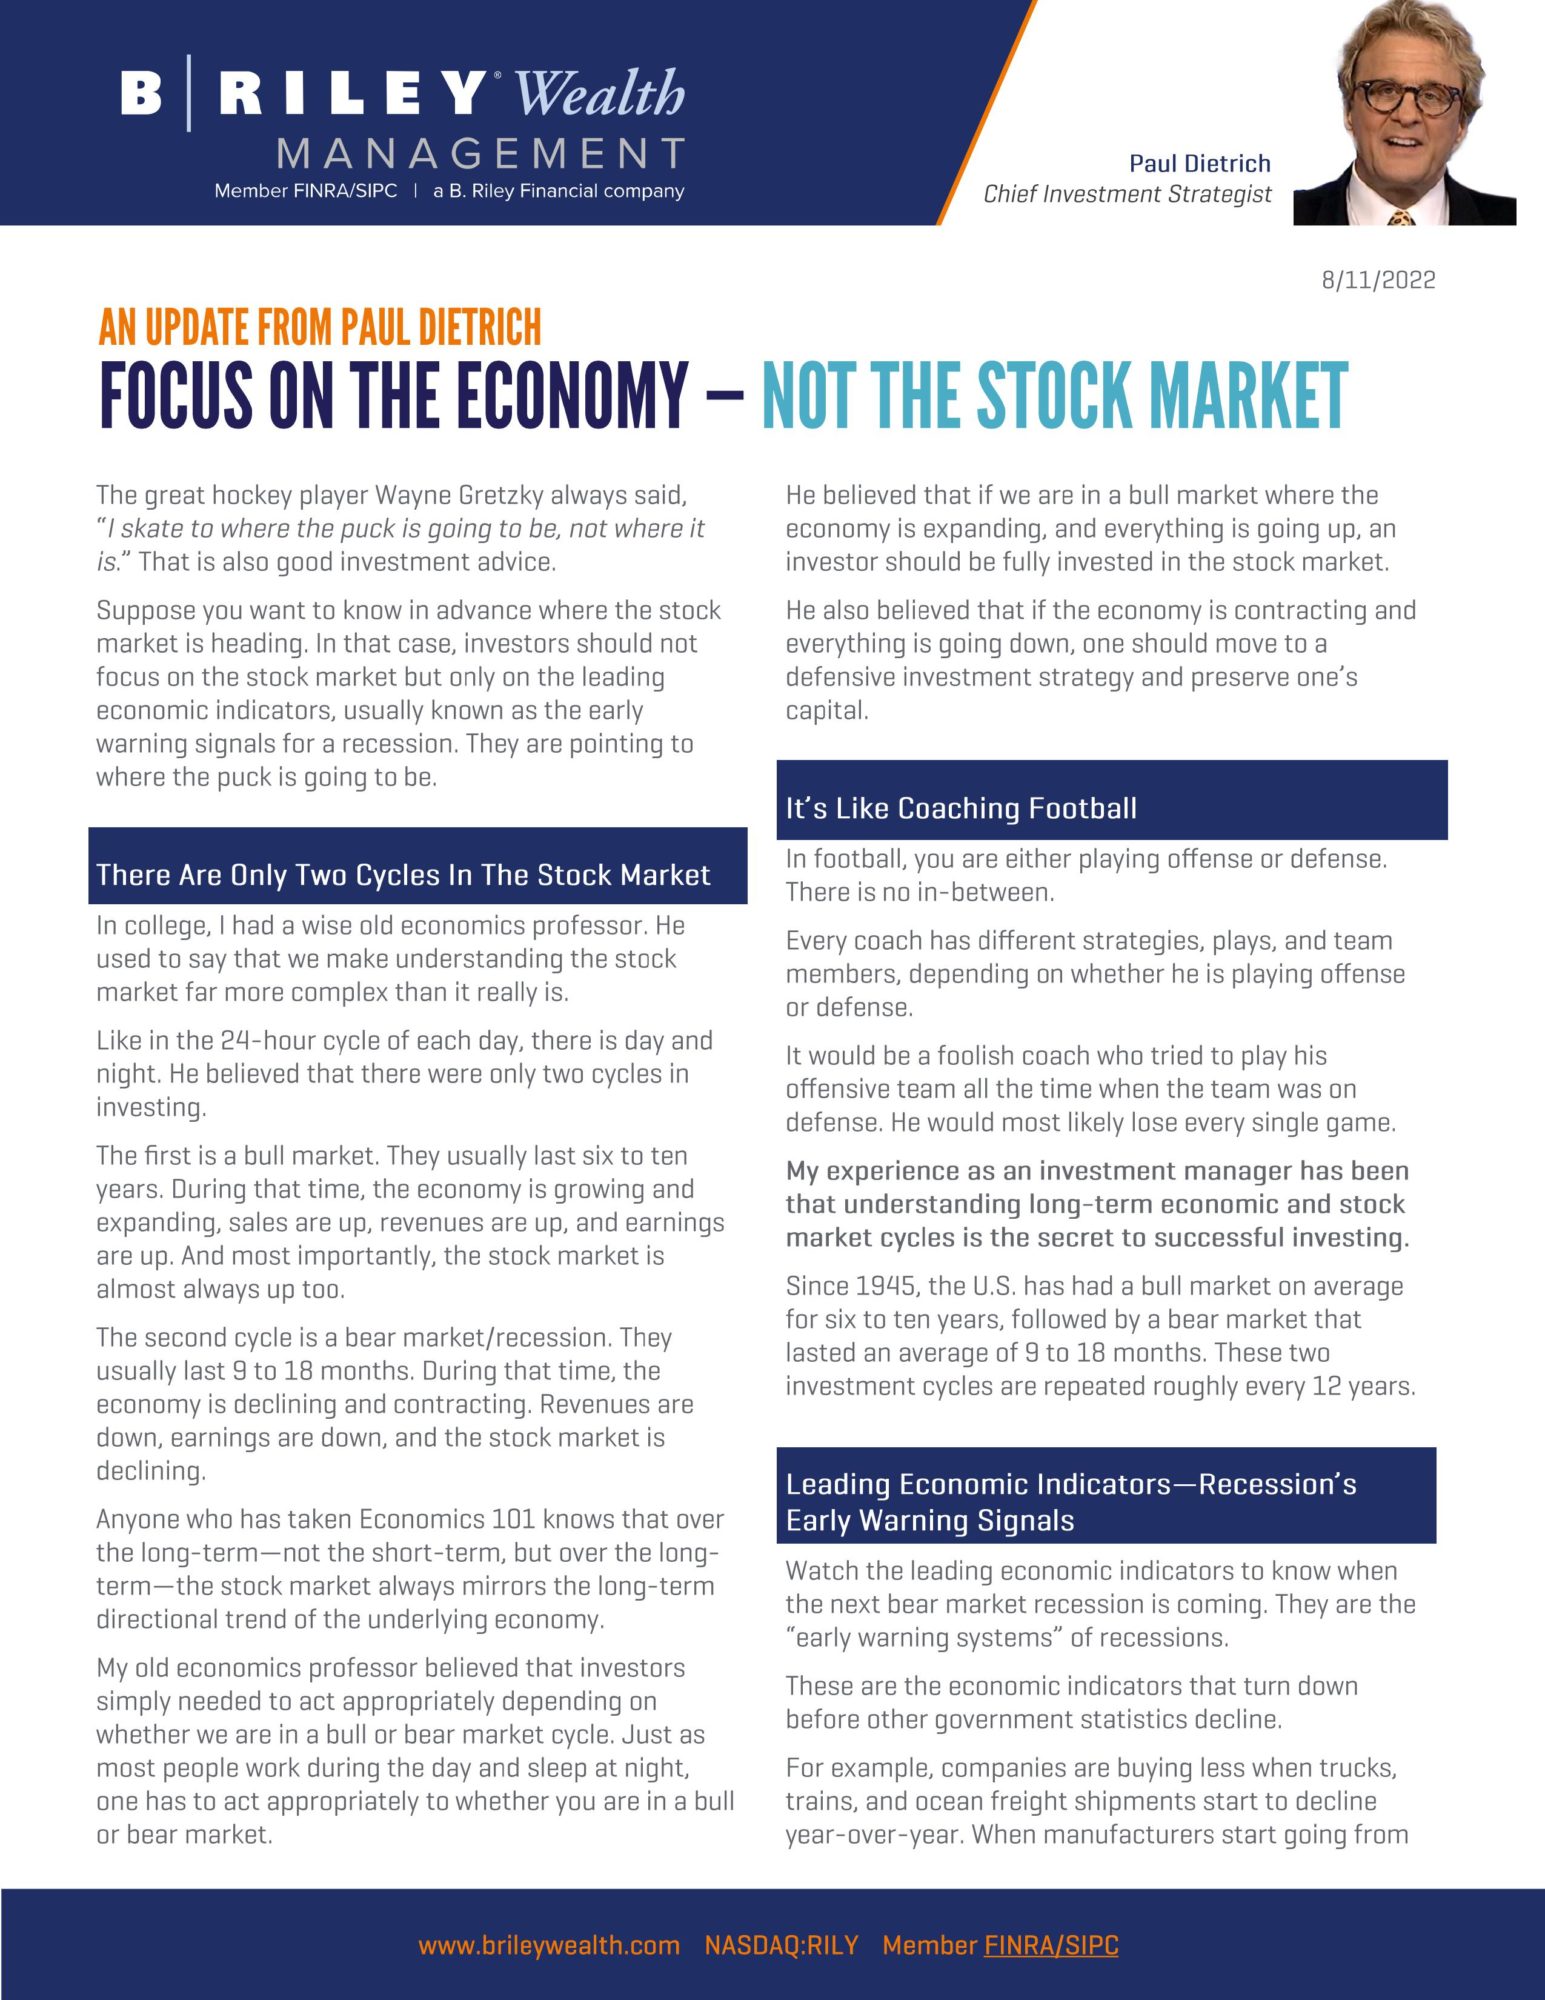 Focus on the Economy – Not the Stock Market